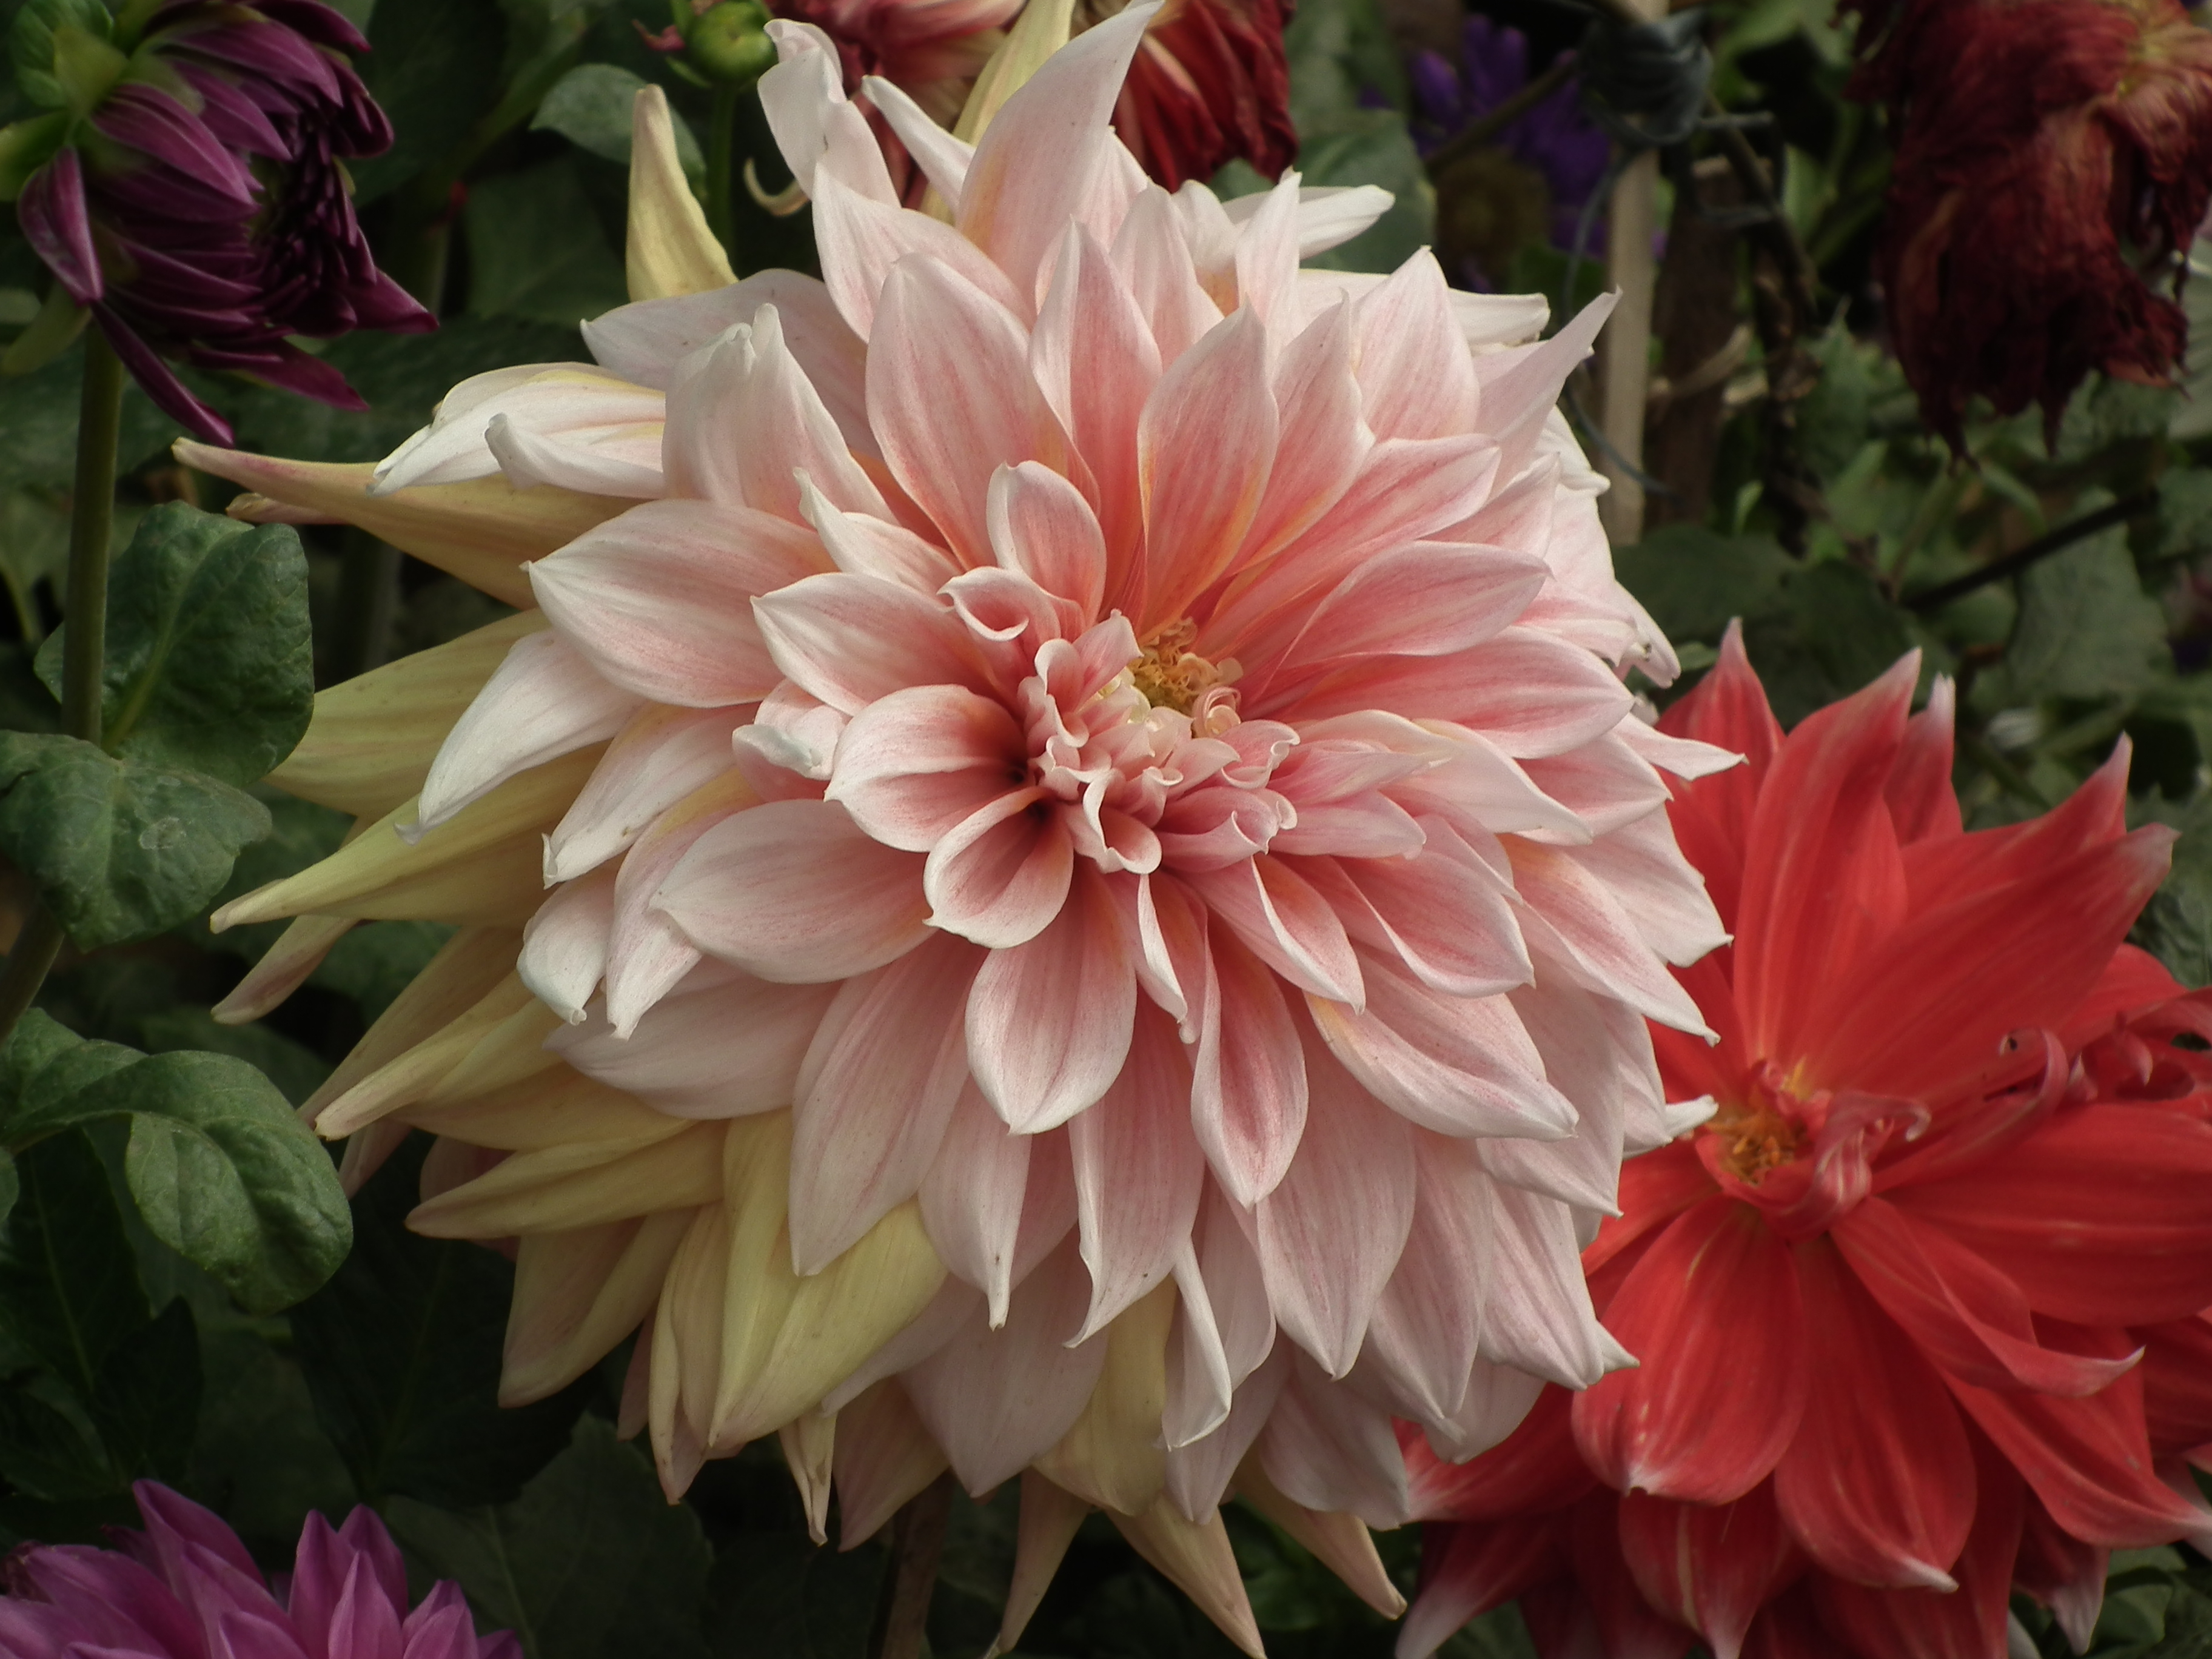 Dahlia from lalbagh 1945